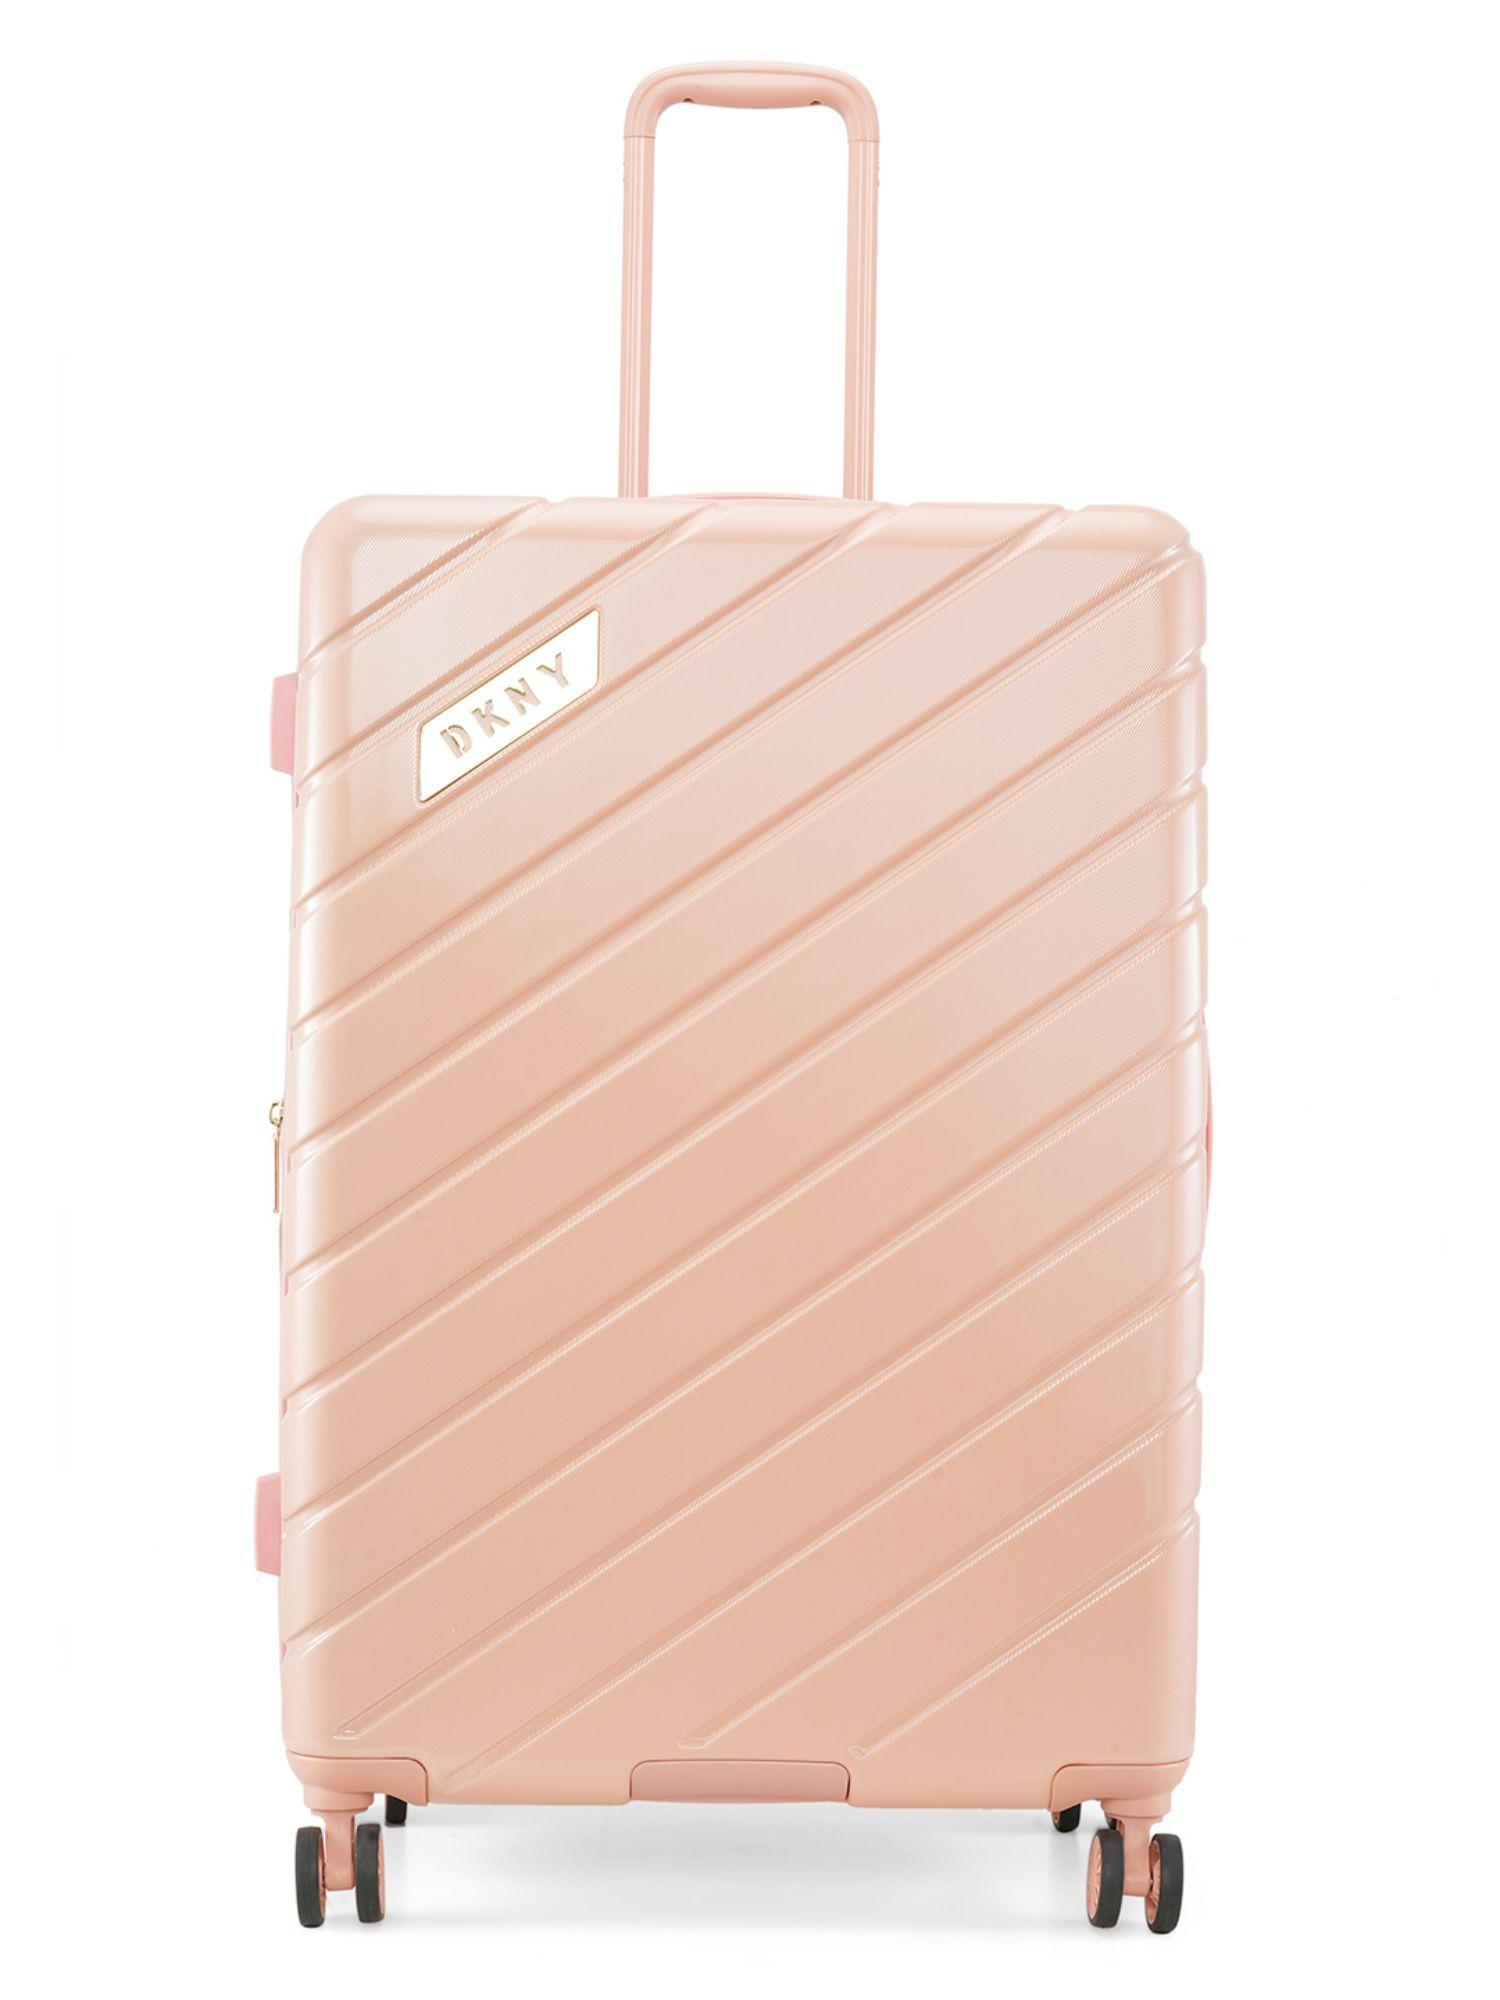 bias pink color abs material hard 20 inches cabin size trolley